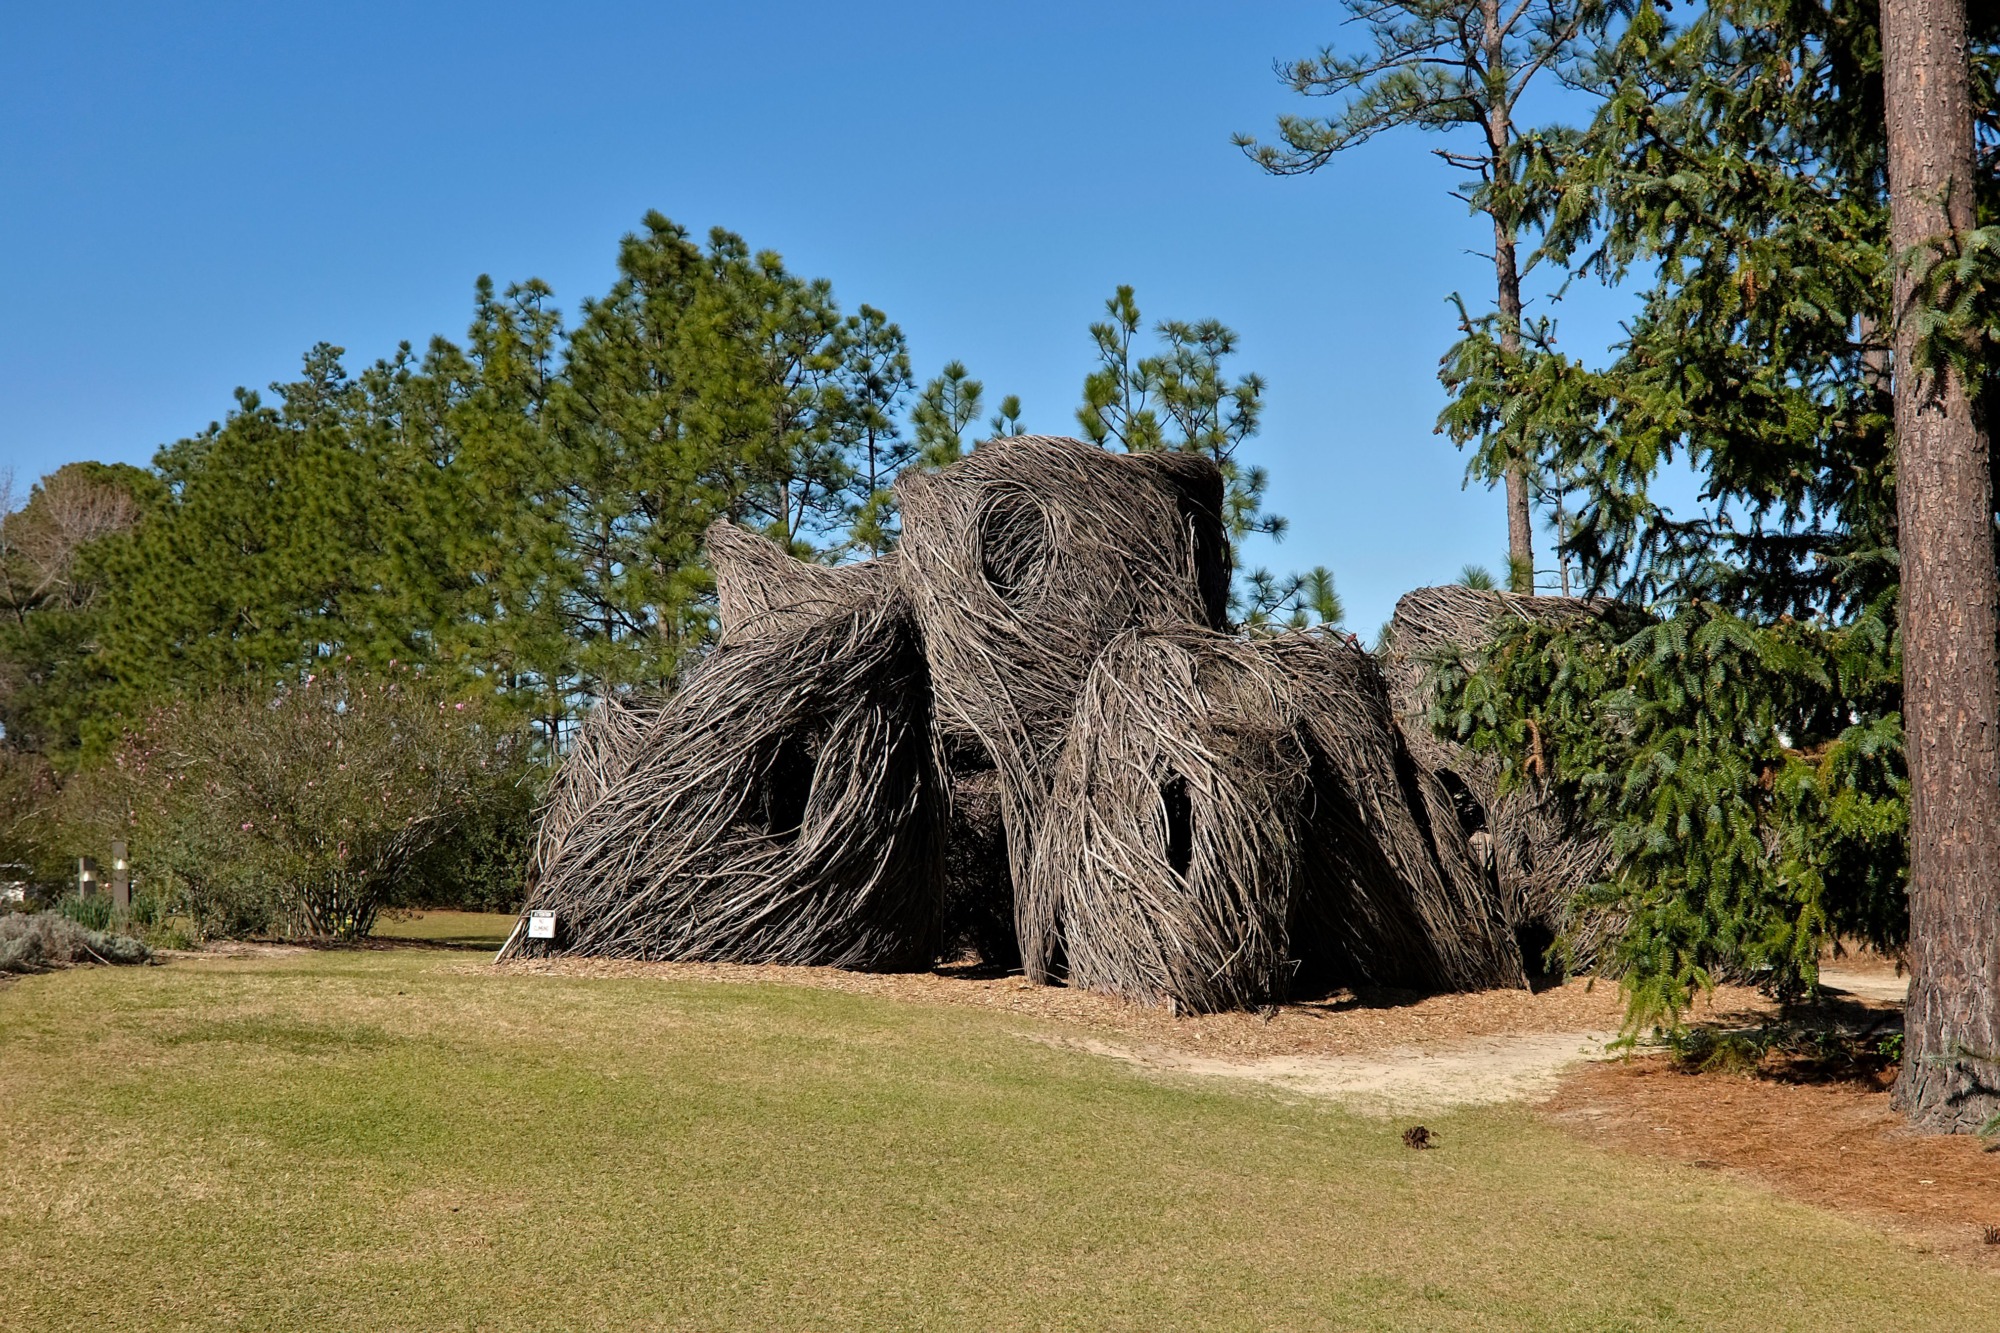 A swirling sculpture of branches at Sandhills Horticultural Gardens